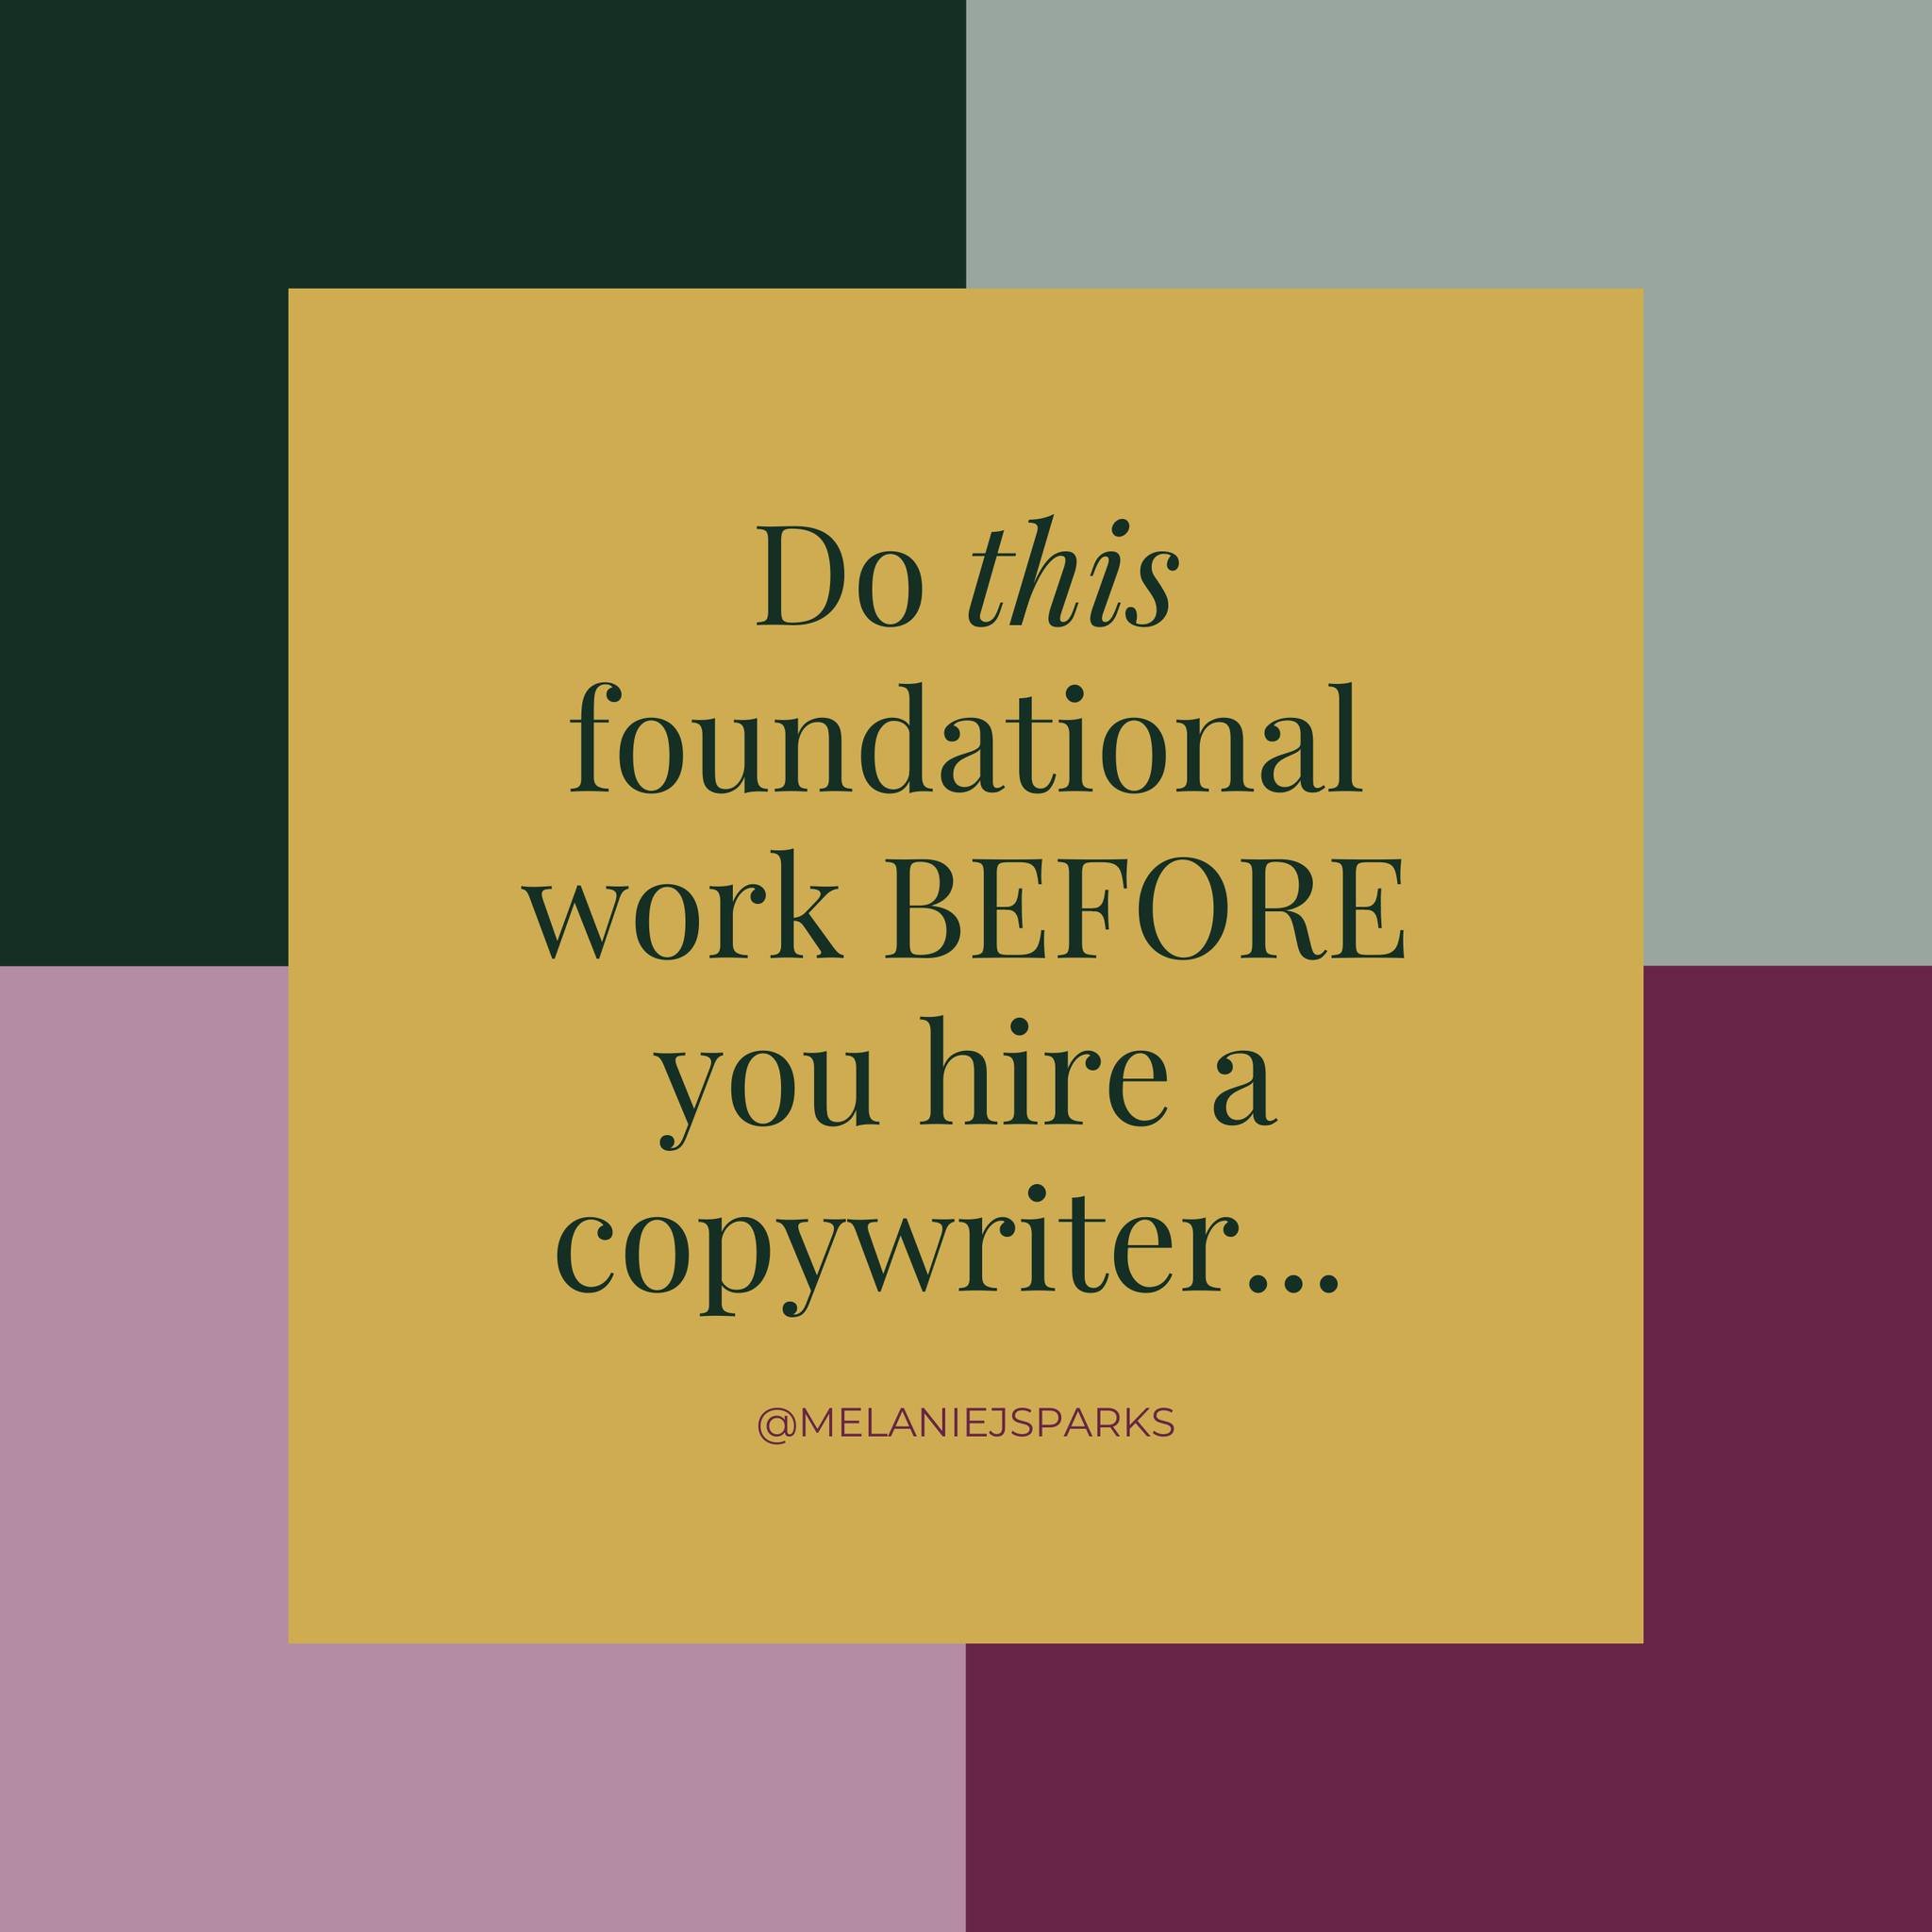 I keep seeing other service providers and coaches throw shade at copywriters.

Let me set the record straight.

Copywriting won't fix your messaging...

...if it's misaligned or missing altogether.

That's why you might consider hiring a copywriter w